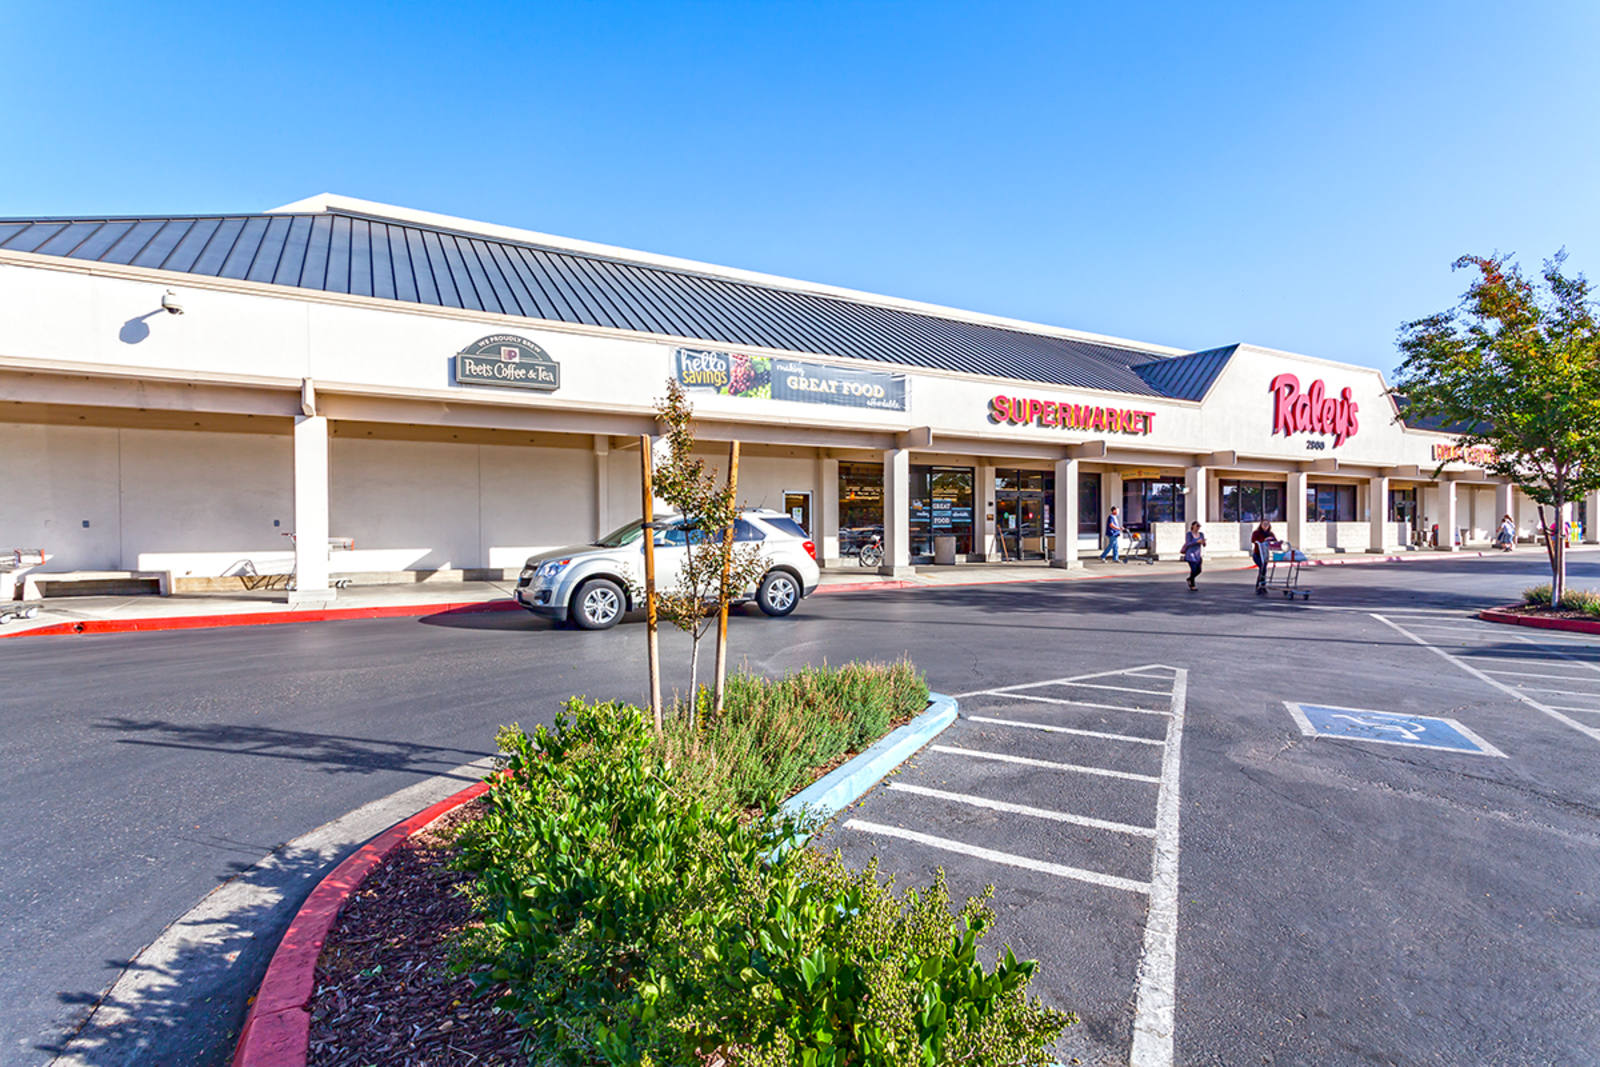 For Lease Restaurant & Retail Opportunity in the El Paseo Shopping